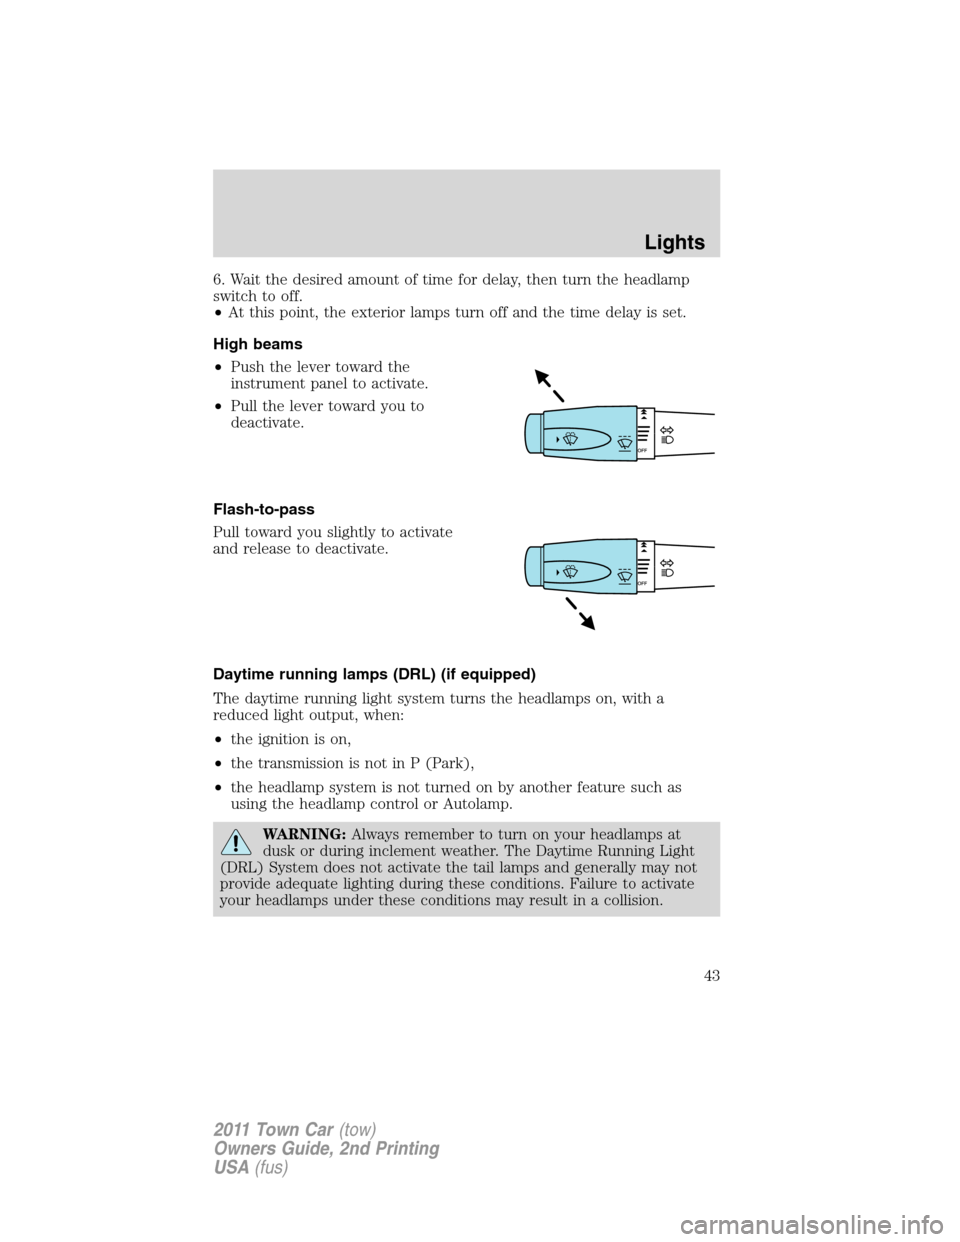 LINCOLN TOWN CAR 2011  Owners Manual 6. Wait the desired amount of time for delay, then turn the headlamp
switch to off.
•At this point, the exterior lamps turn off and the time delay is set.
High beams
•Push the lever toward the
ins